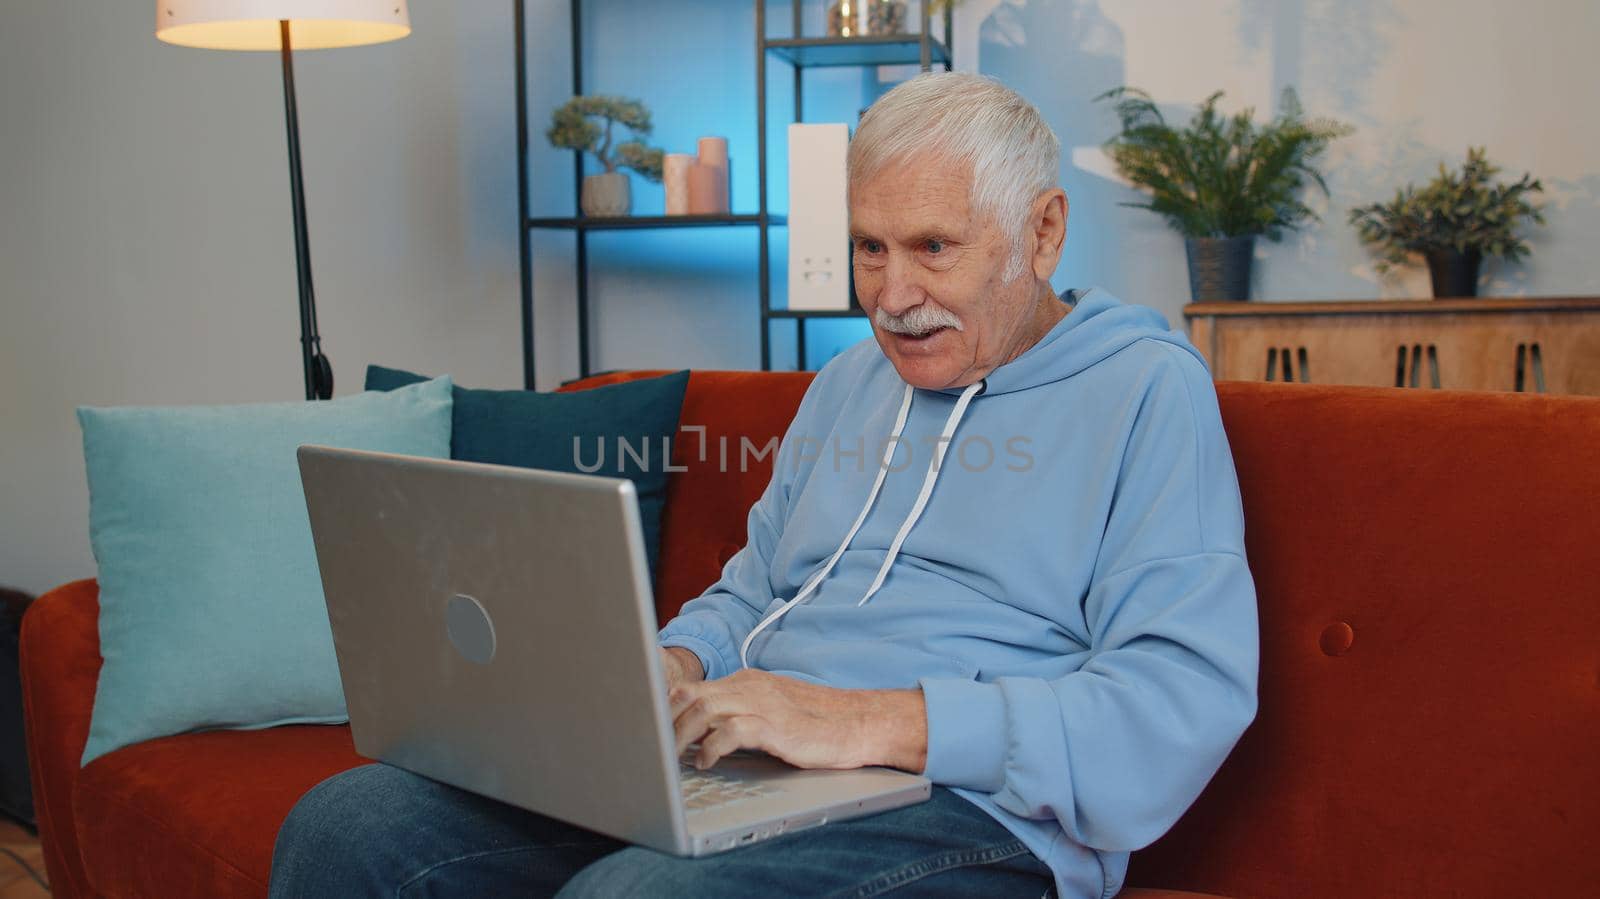 Mature elderly man freelancer at home living room sits on orange couch, opens laptop. Senior old retired grandfather works on notebook, sends messages, makes online purchases, watching movies, working